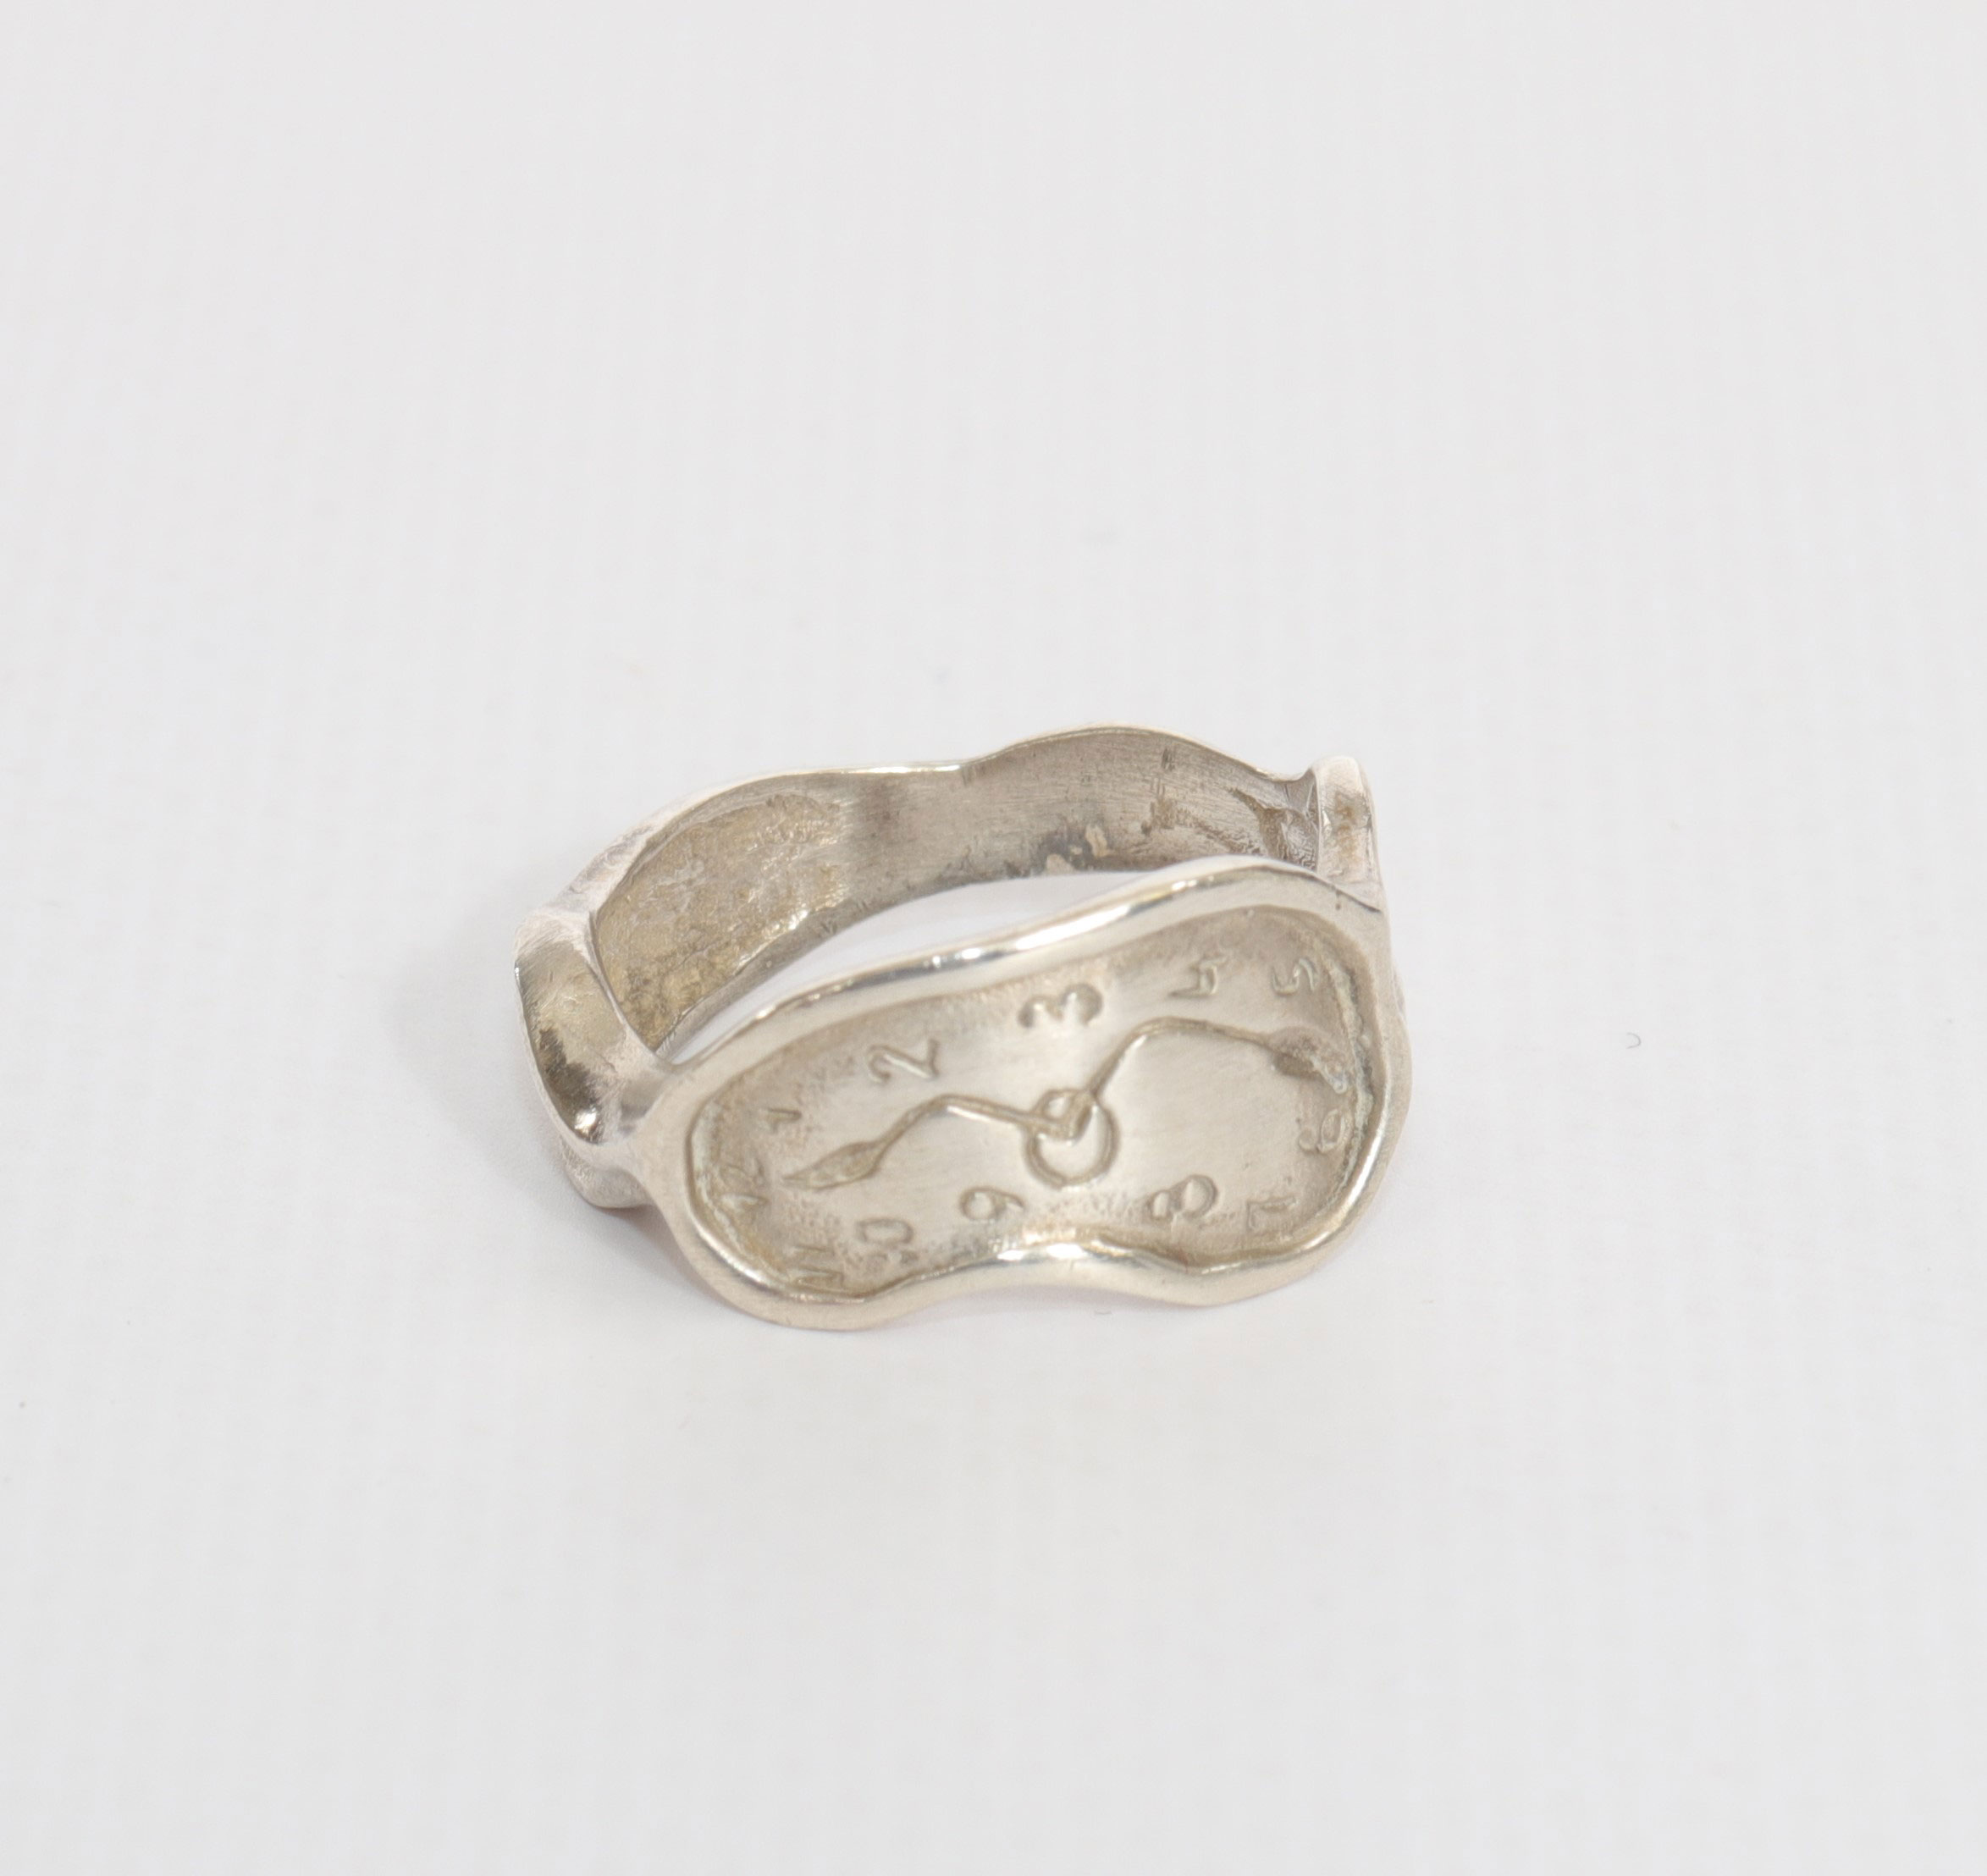 Salvador Dali. Circa 60. Soft watch. Sterling silver ring representing a soft watch.